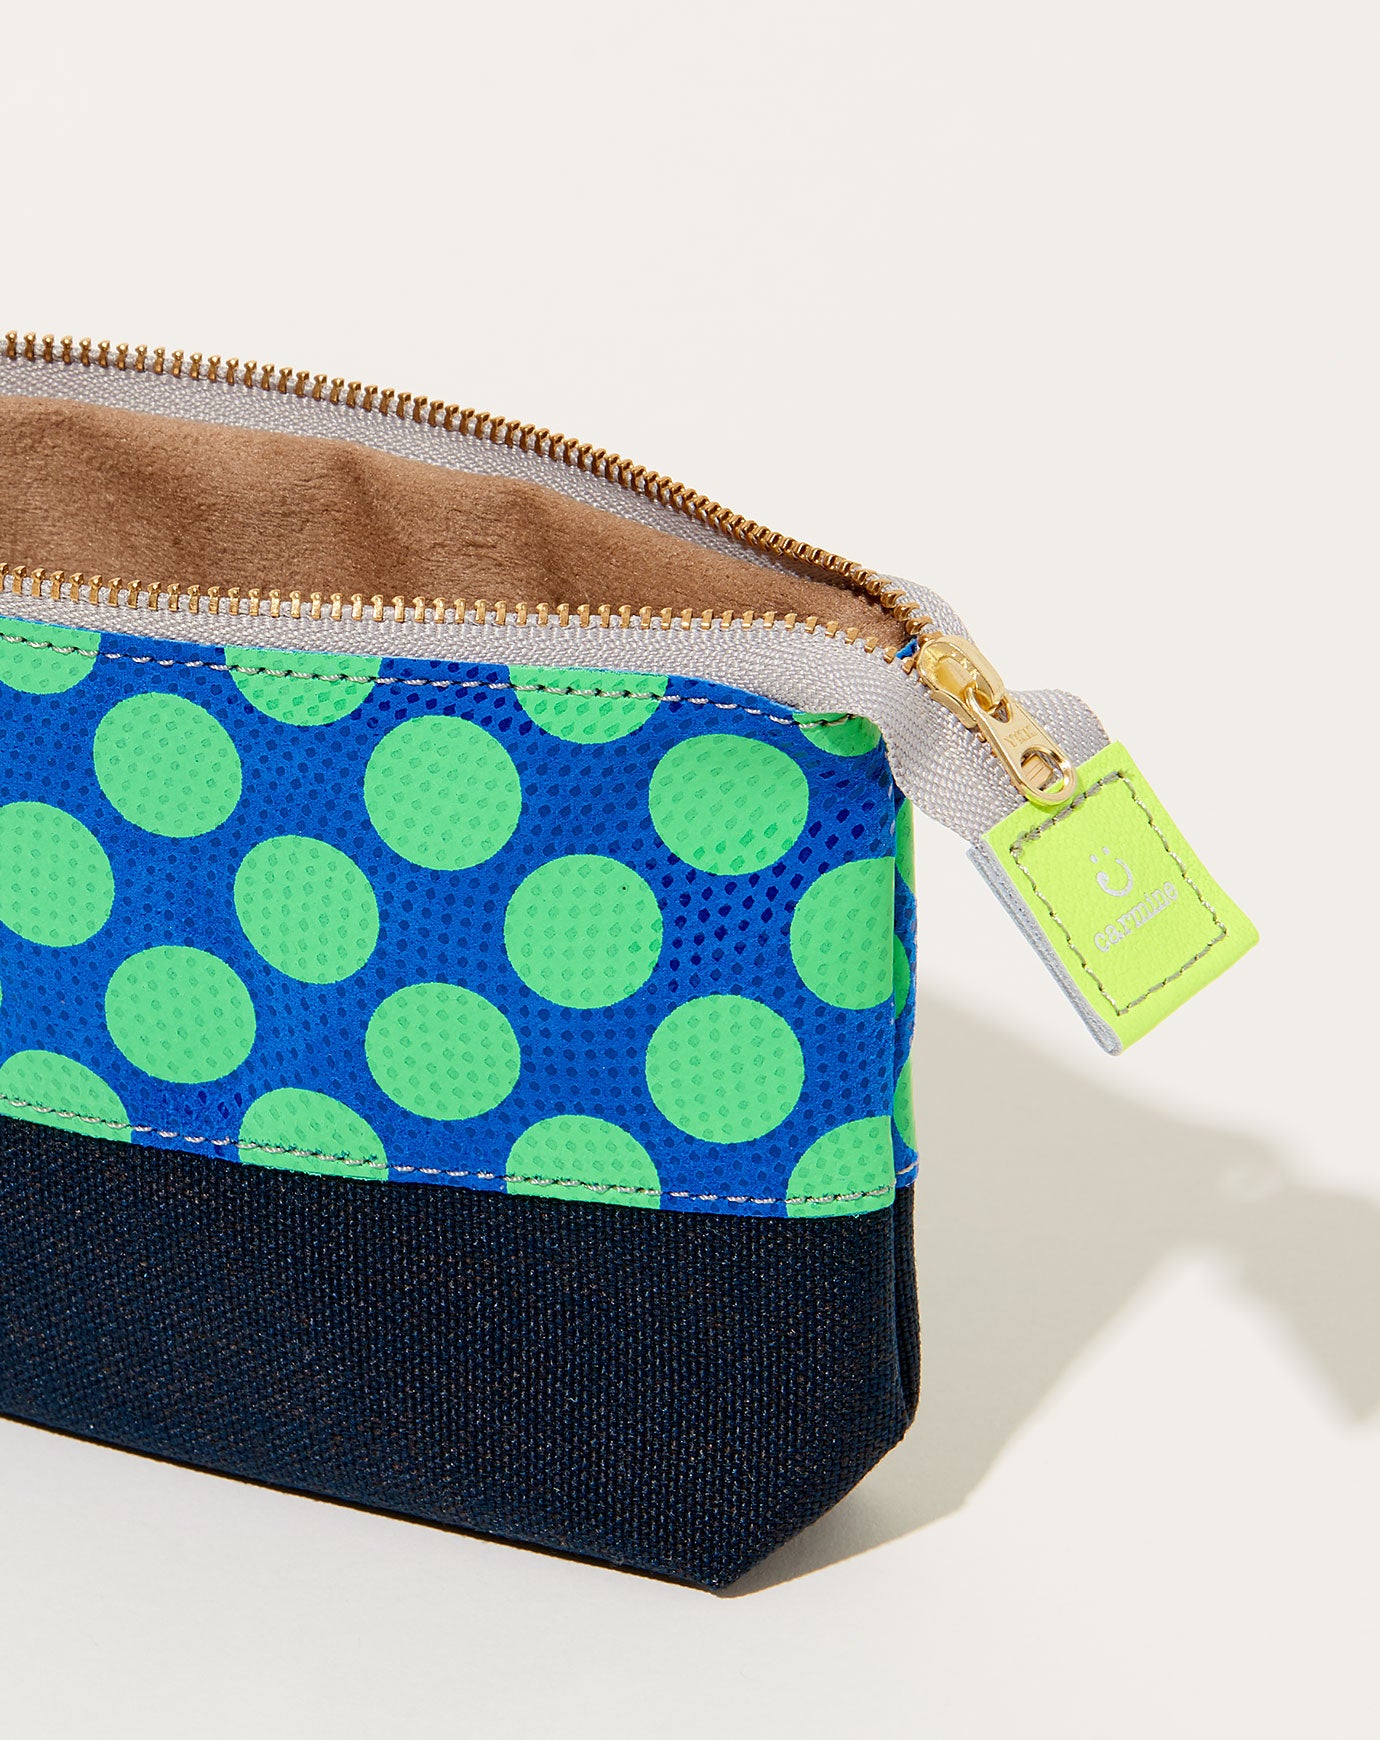 Carmine Ecology Leather Pouch in Neon Green